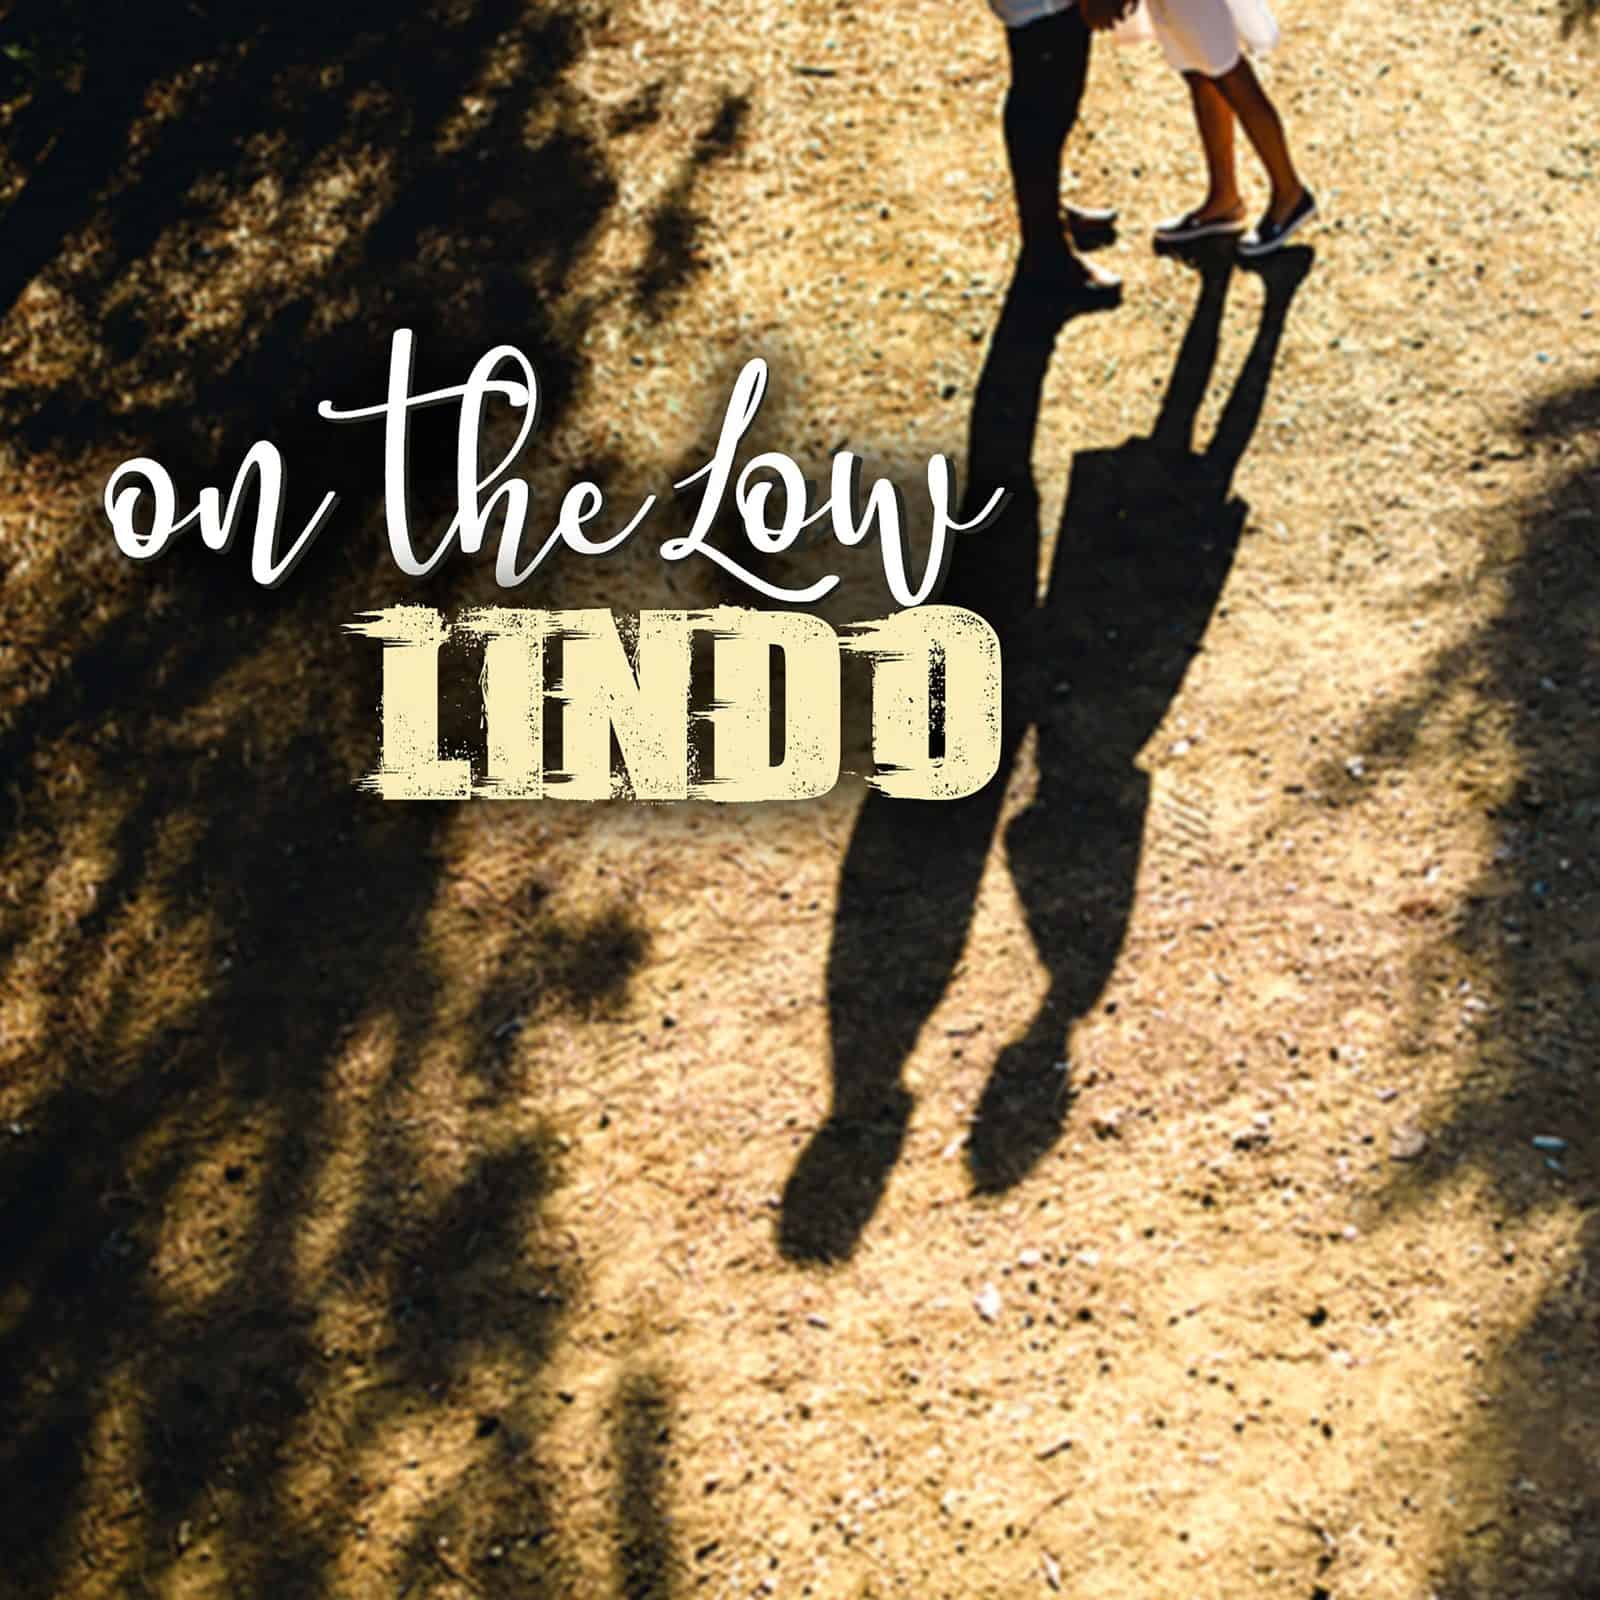 Lindo - On The Low prod. by Jon FX